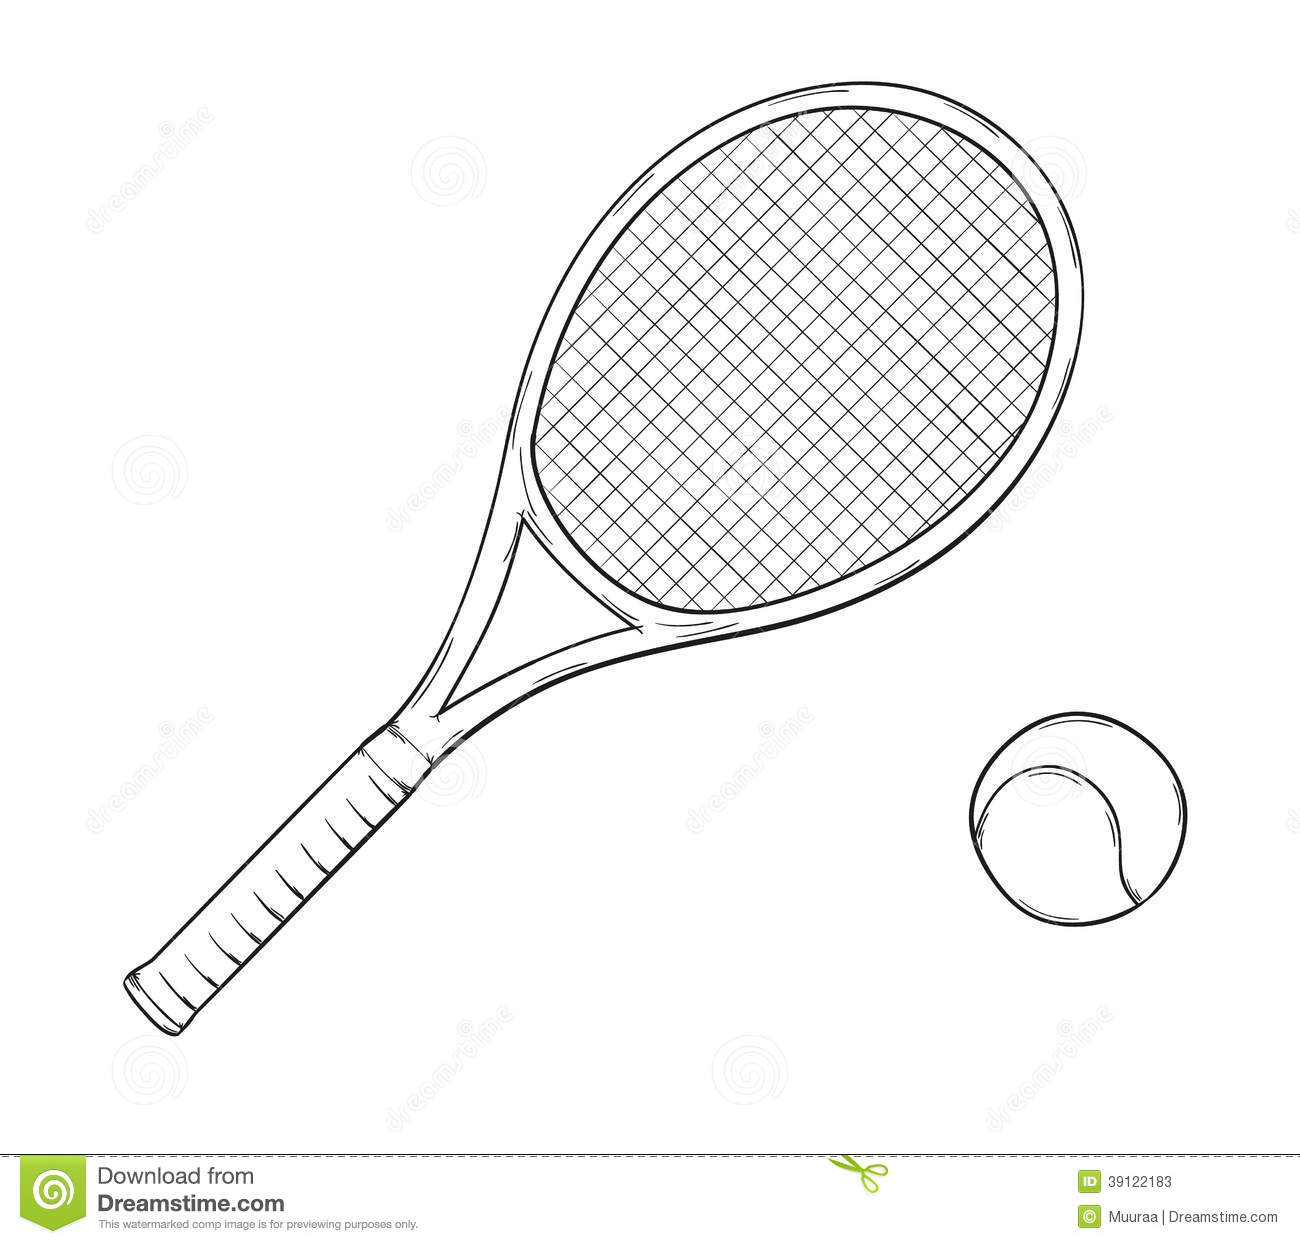 Sketch Of The Tennis Racket And Ball Isolated